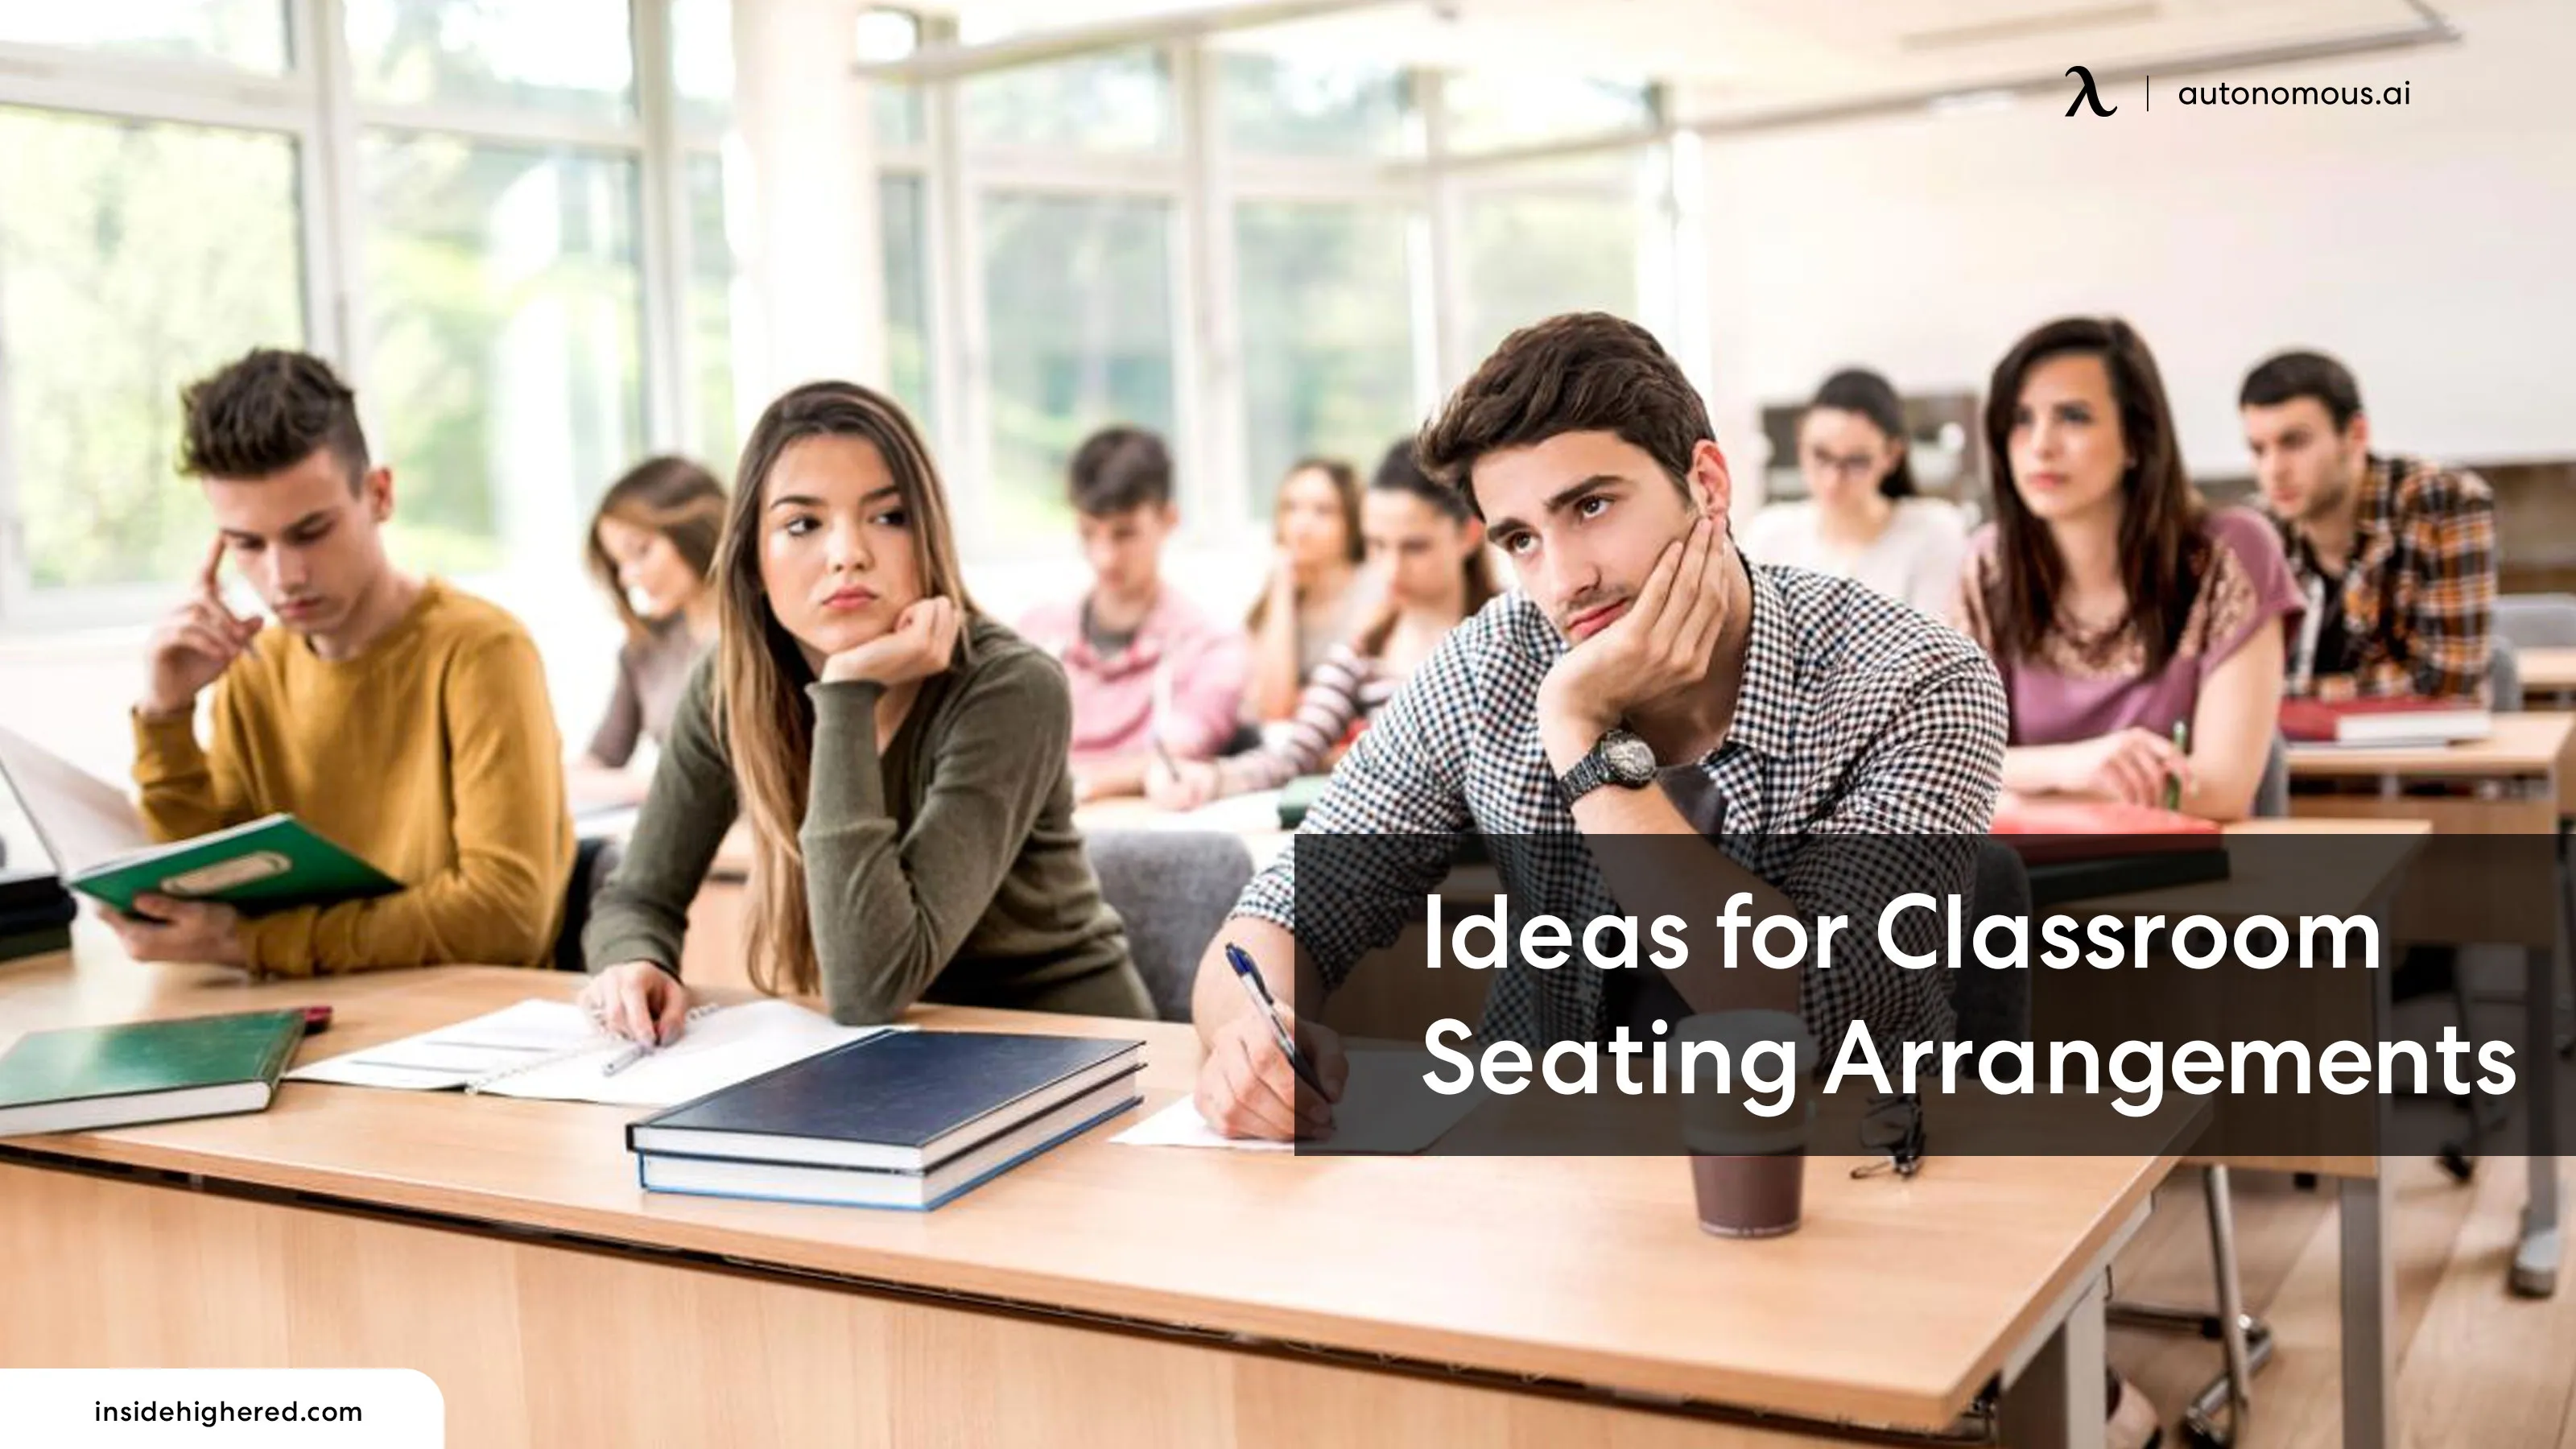 Classroom Seating Arrangements: Finding the Perfect Setup